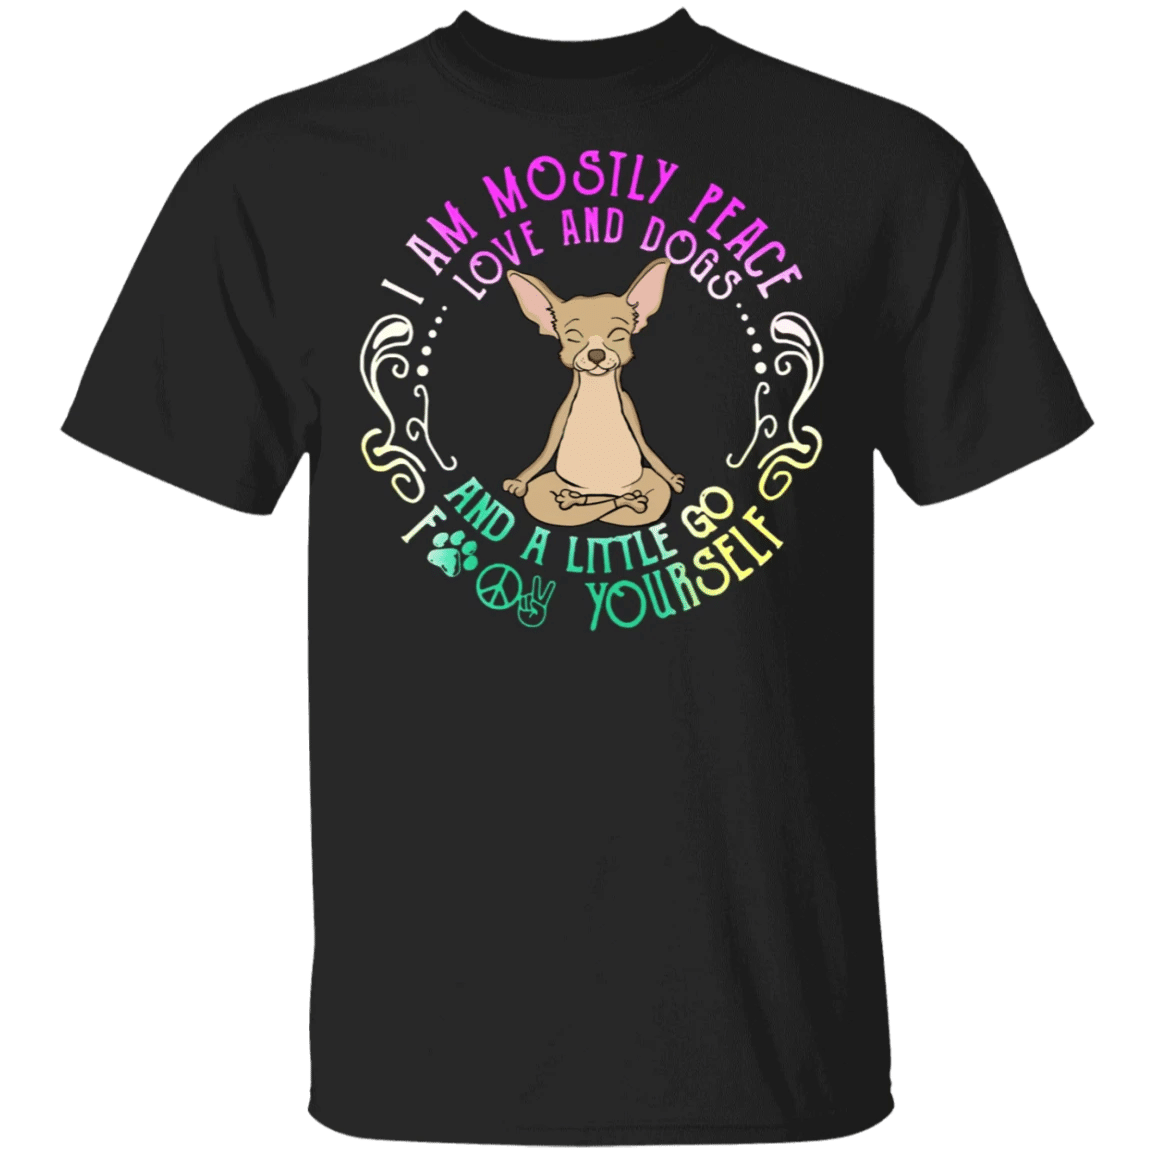 Chihuahua Yoga I Am Mostly Peace Love And Dogs And A little Go Duck Yourself Shirt